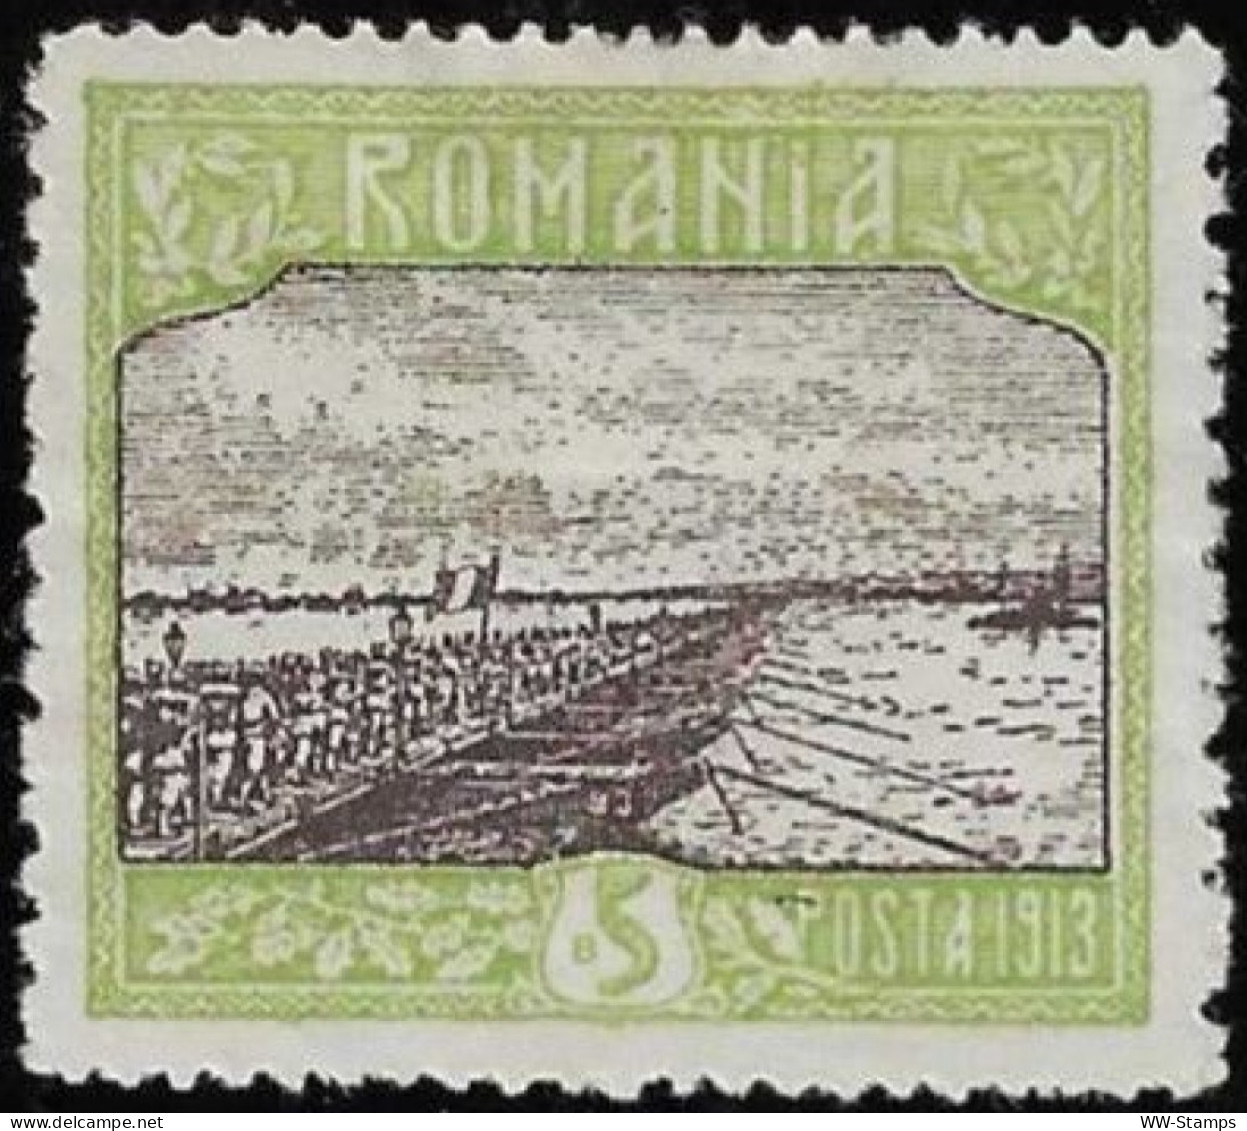 Romania 1913 Mint Stamp Silistria Military Troops Crossing Danube 5 Bani [WLT91] - Unused Stamps